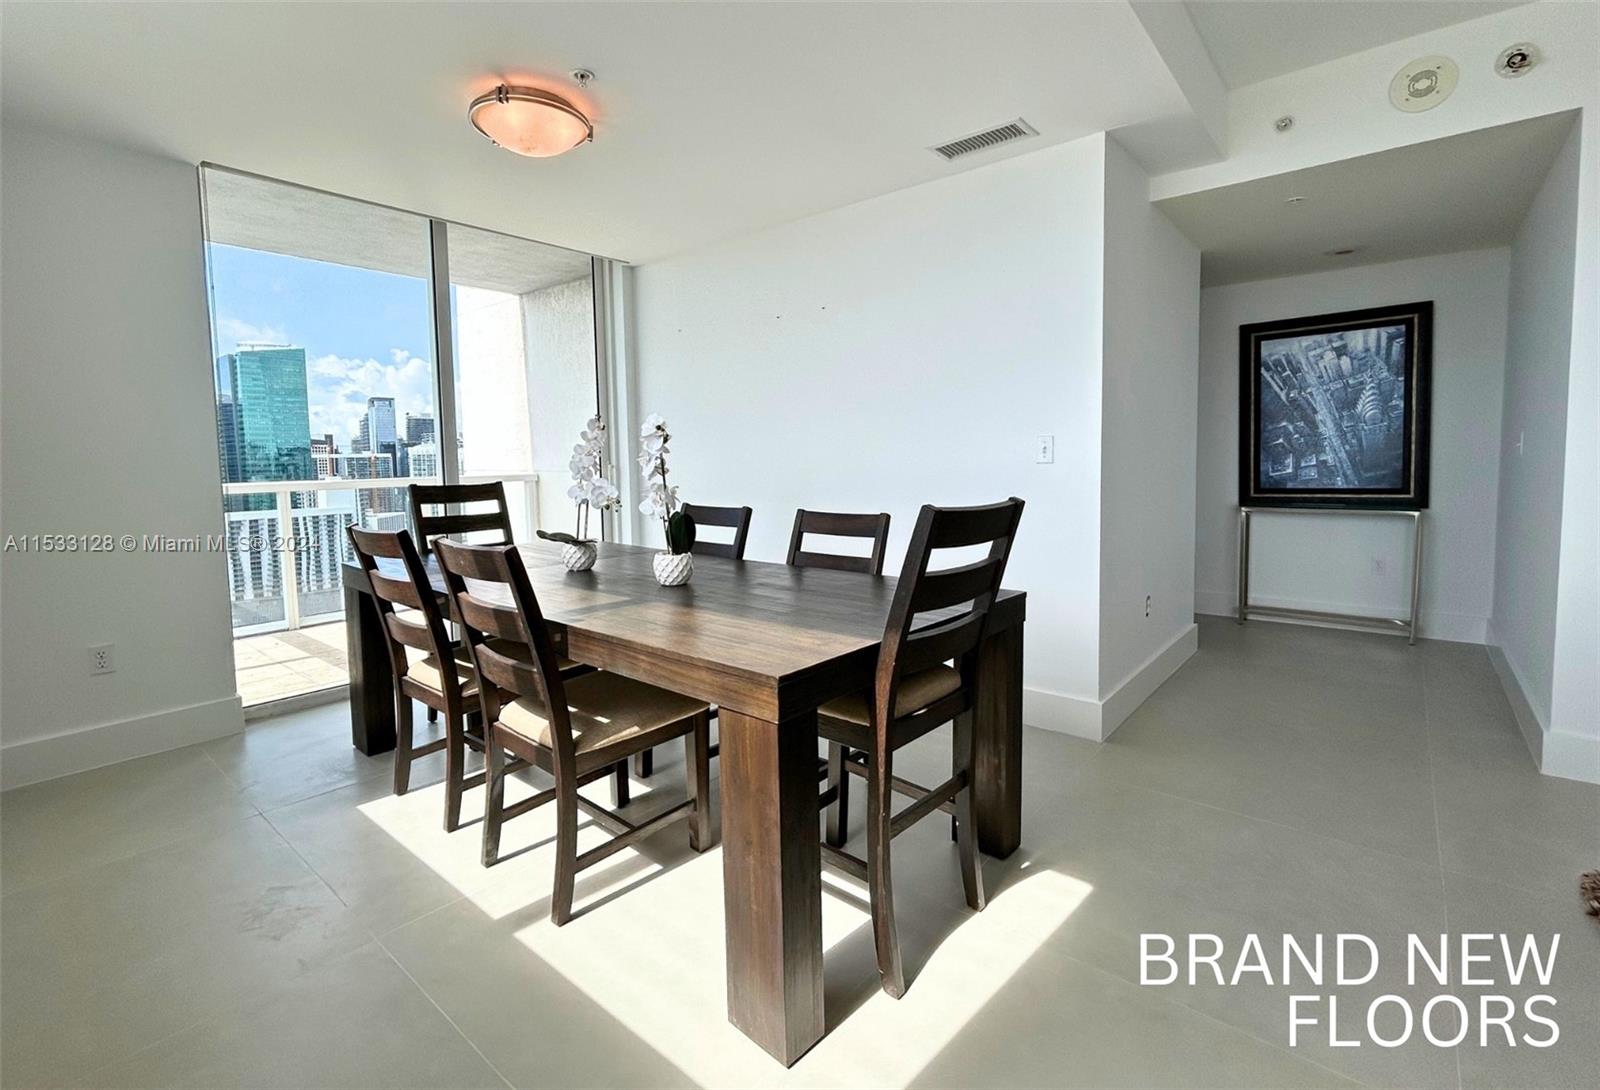 The best line at The North Tower with Direct Bay Views - Fully Furnished 
Discover the epitome of luxury living in this incredible large two-bedroom plus den, two full baths apartment with breathtaking views of the cityscape. Situated in close proximity to Miami Dade College and the metro mover, convenience meets comfort in this prime location.
Featuring modern stainless steel appliances, sleek Italian cabinets, and elegant granite countertops, the kitchen exudes sophistication. Tile floors add to the contemporary ambiance, while the wood closets offer ample storage space for your belongings. This apartment is very well managed, landlord representative is very responsive and the unit is kept is on point throughout your lease